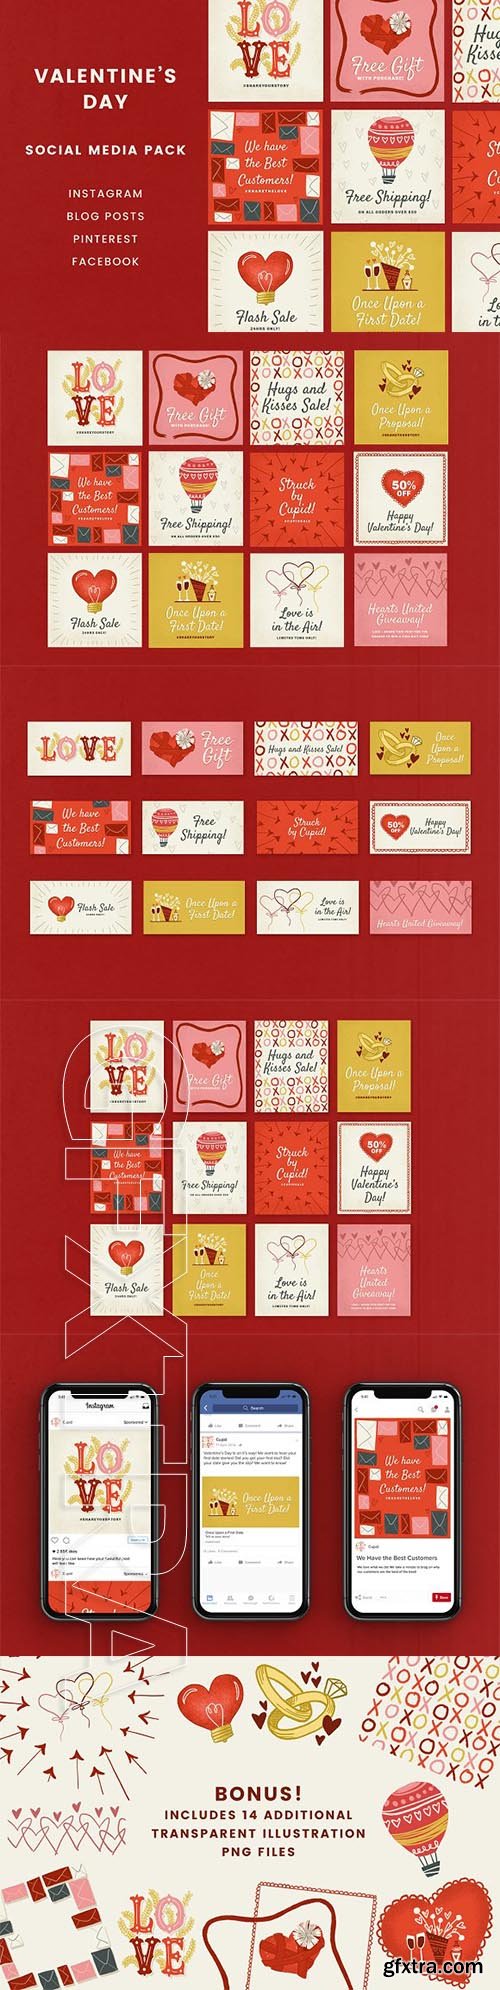 CreativeMarket - Valentines Day Social Pack 2162718